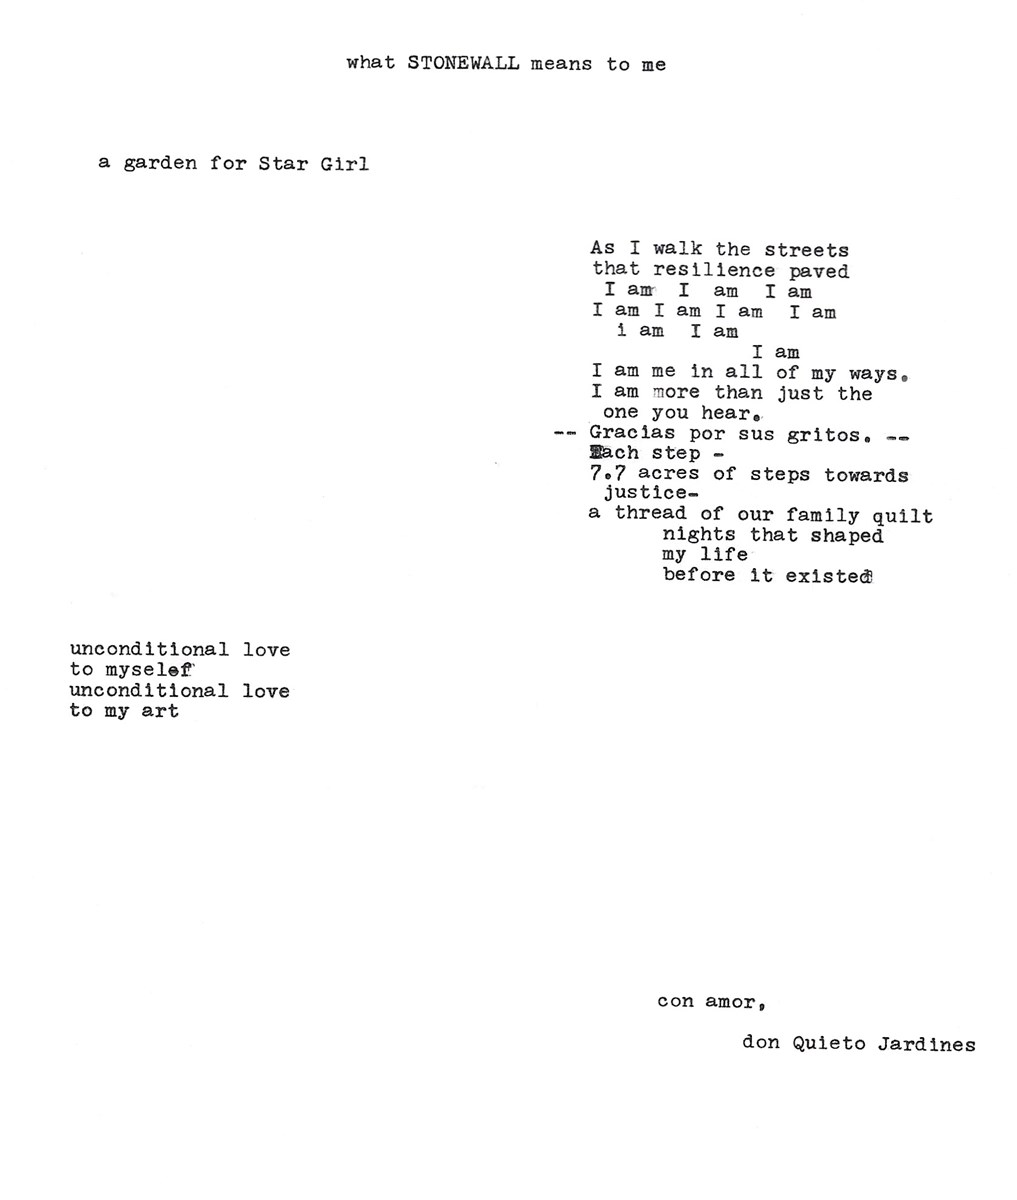 A typed poem